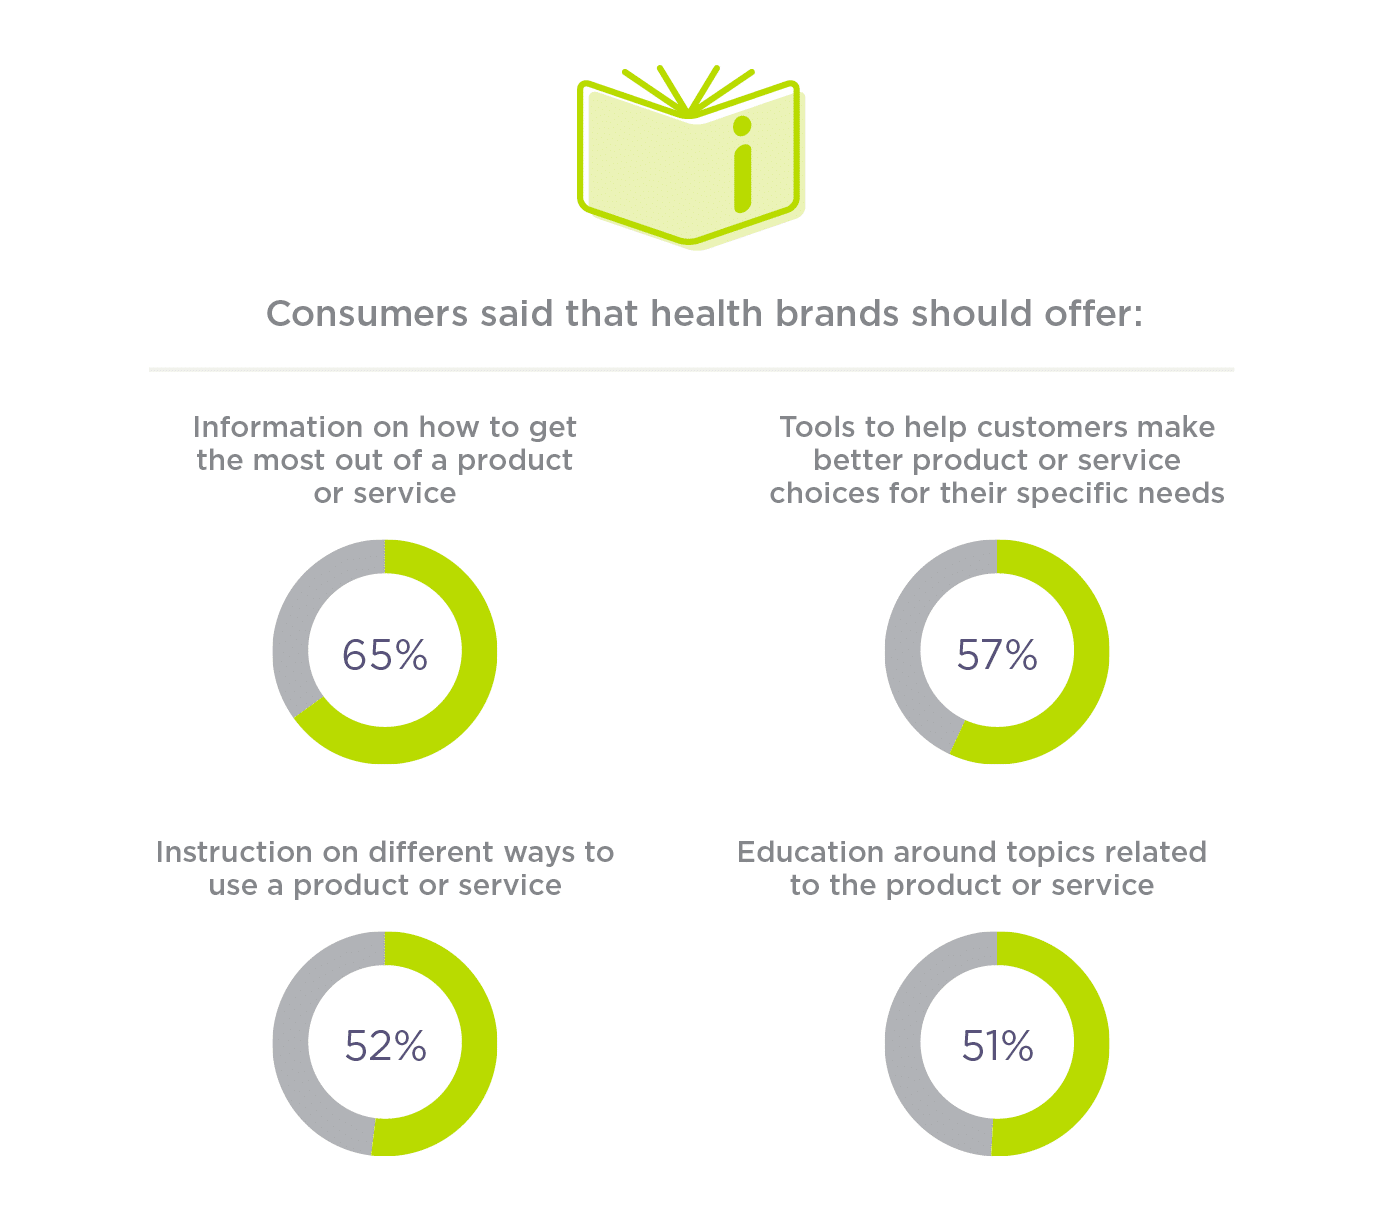 Consumers said that health brands should offer